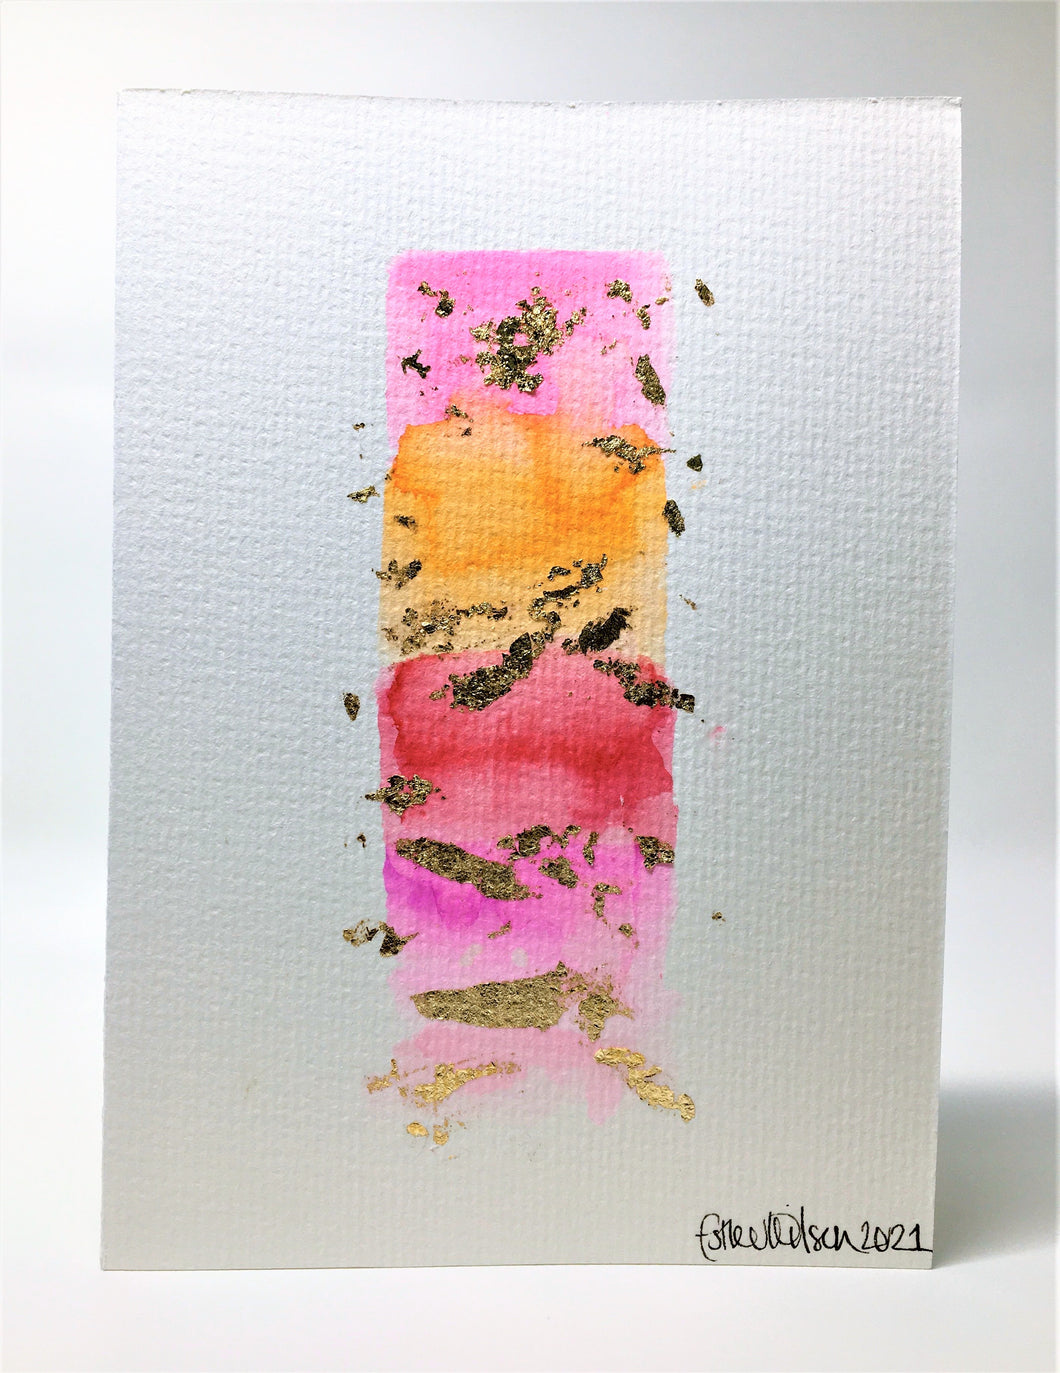 Abstract Orange, Red and Pink, Gold Leaf Design - Hand Painted Greeting Card